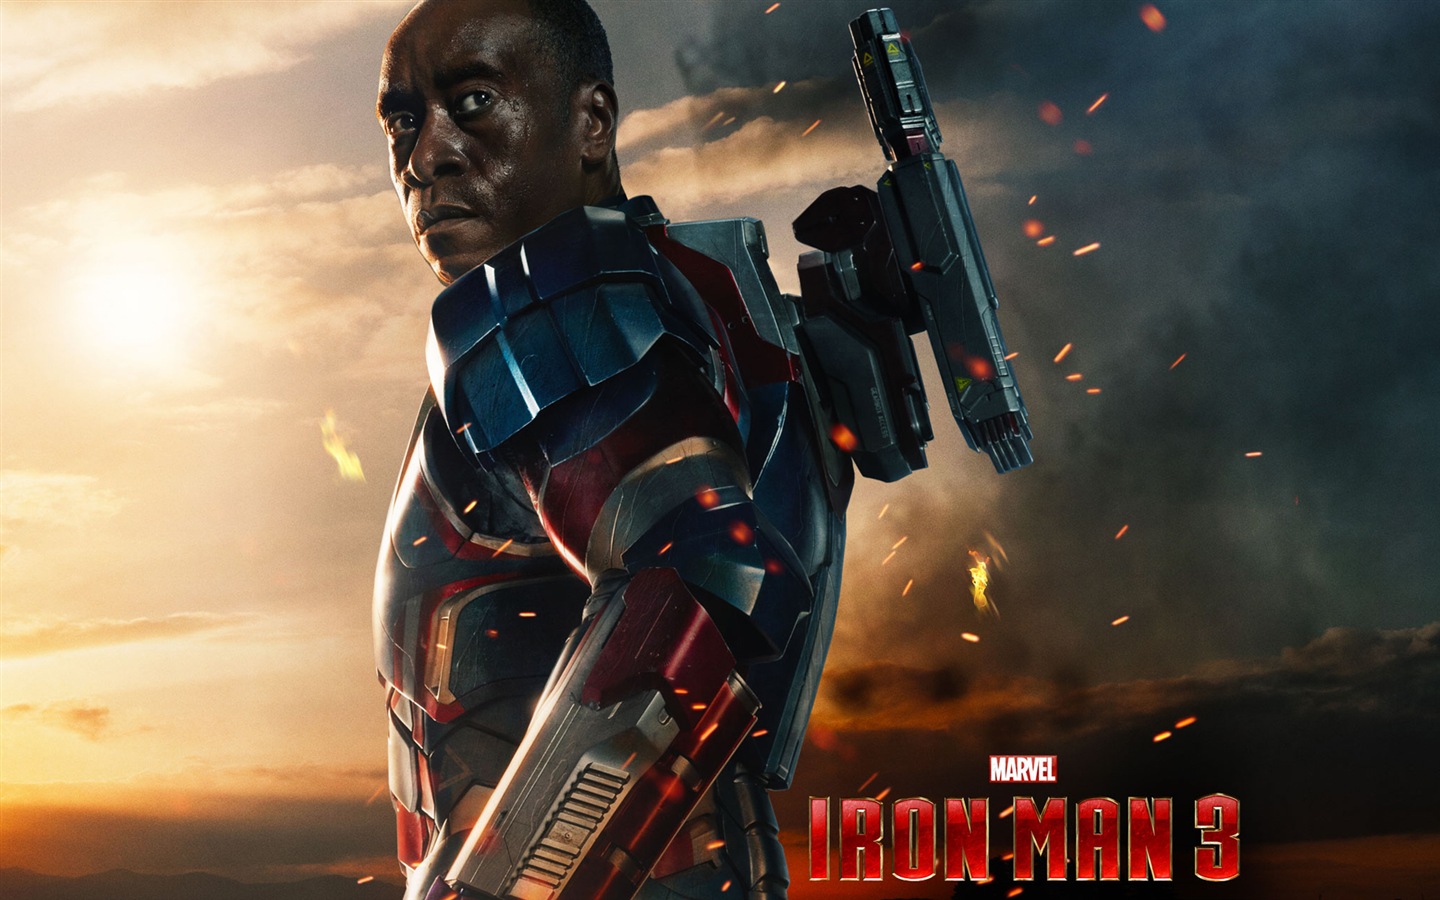 2013 Iron Man 3 newest HD wallpapers #14 - 1440x900